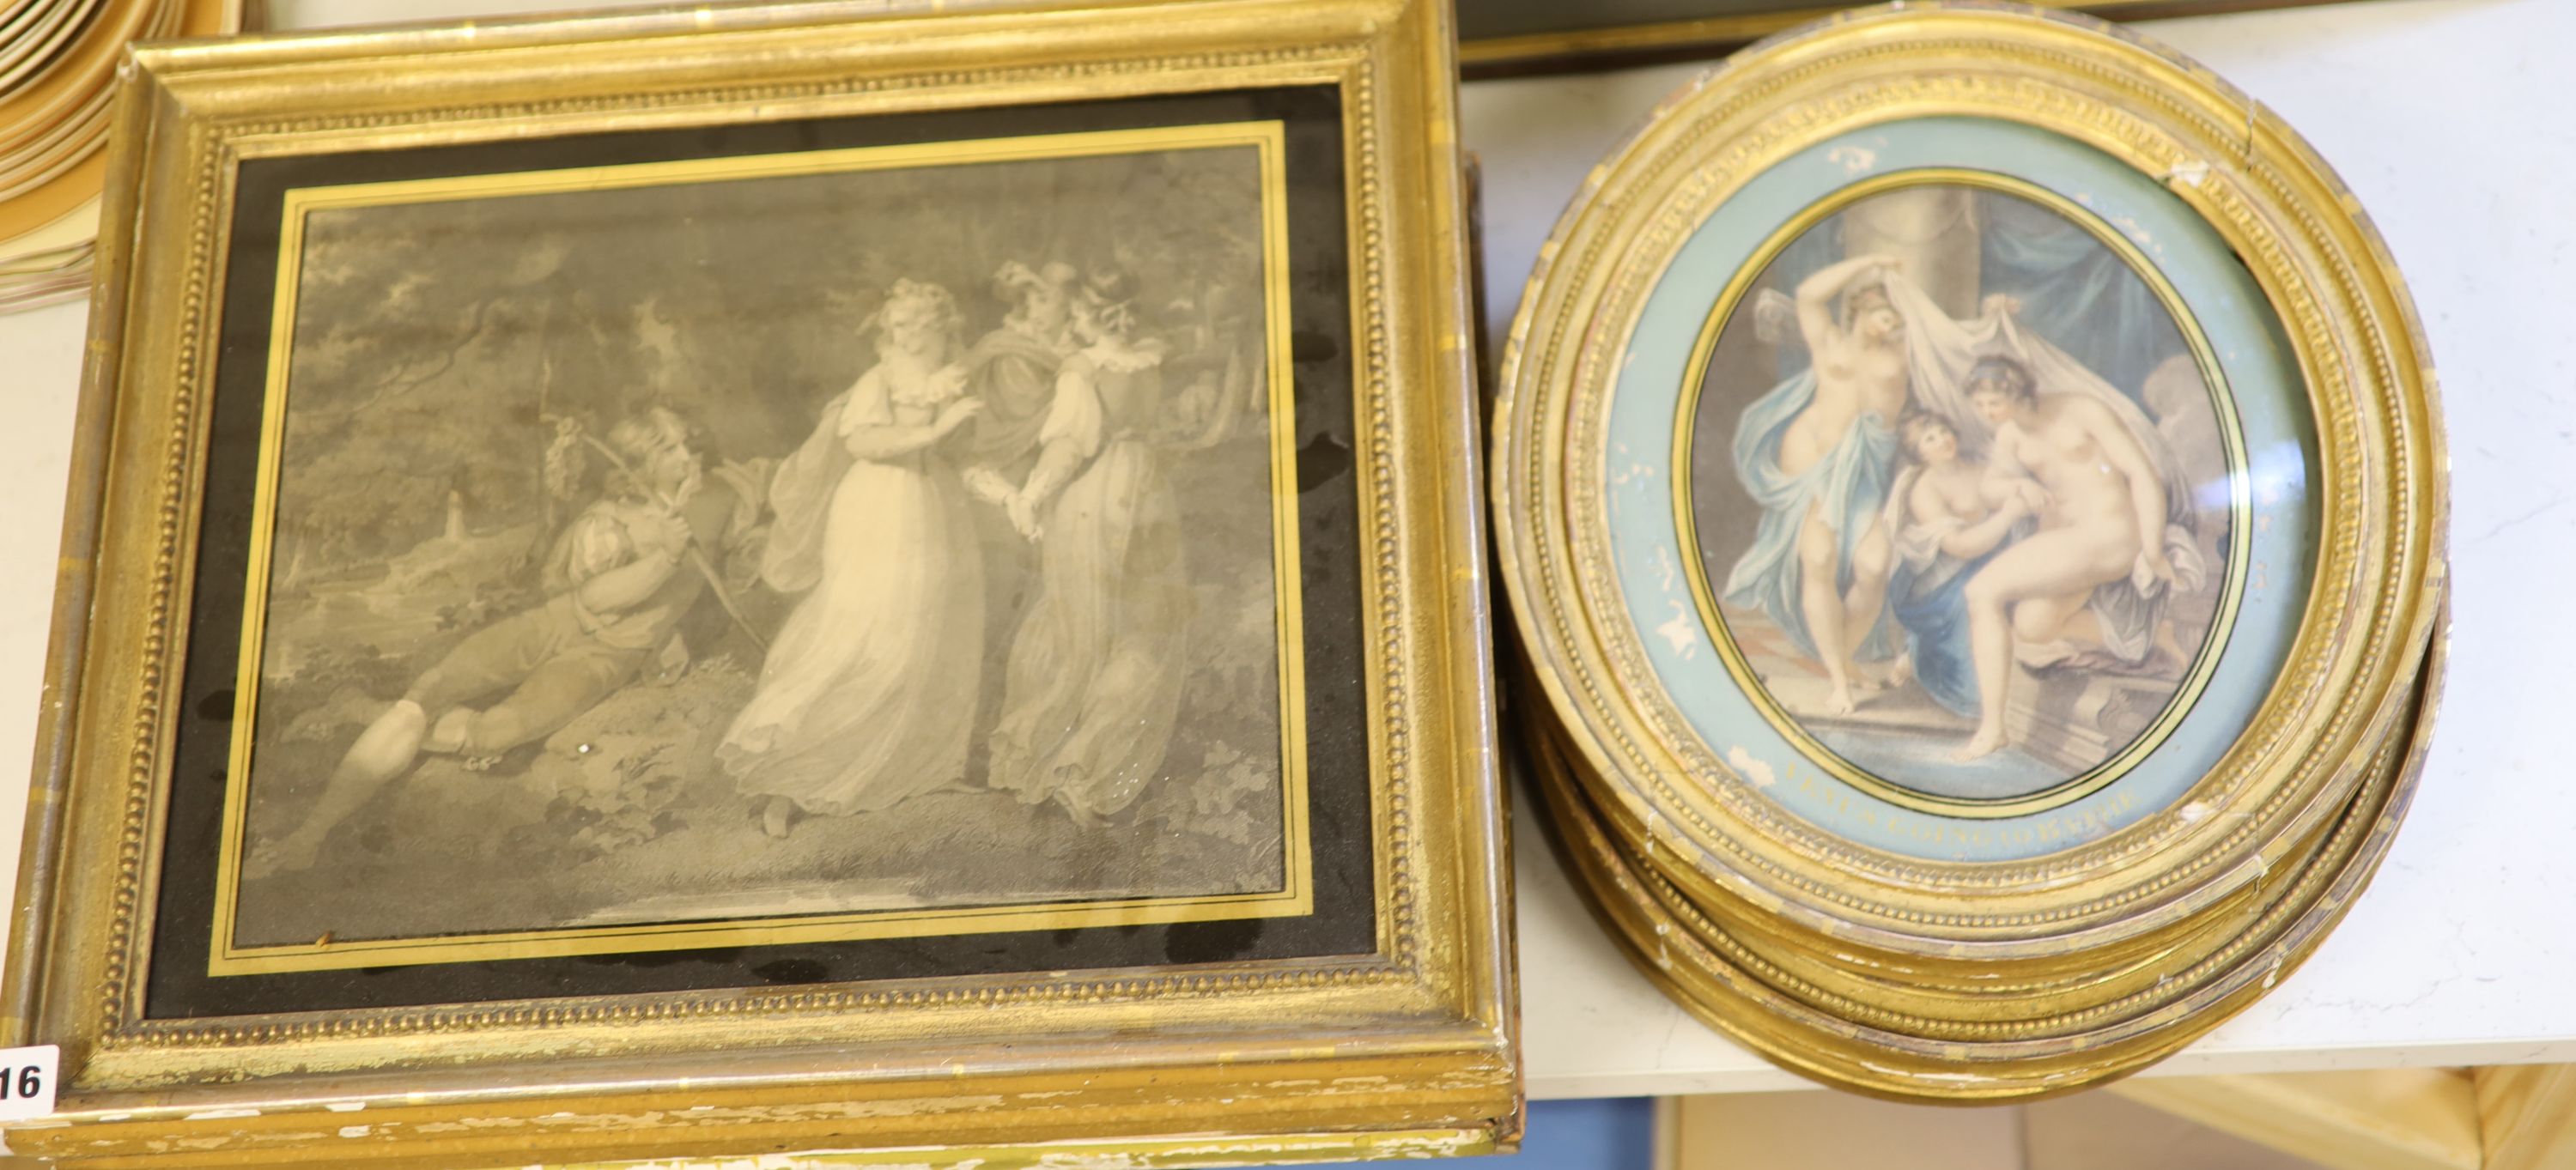 After Cipriani, pair of eglomise framed engravings, Venus and her Bath, another oval framed engraving and two pairs of rectangular engravings